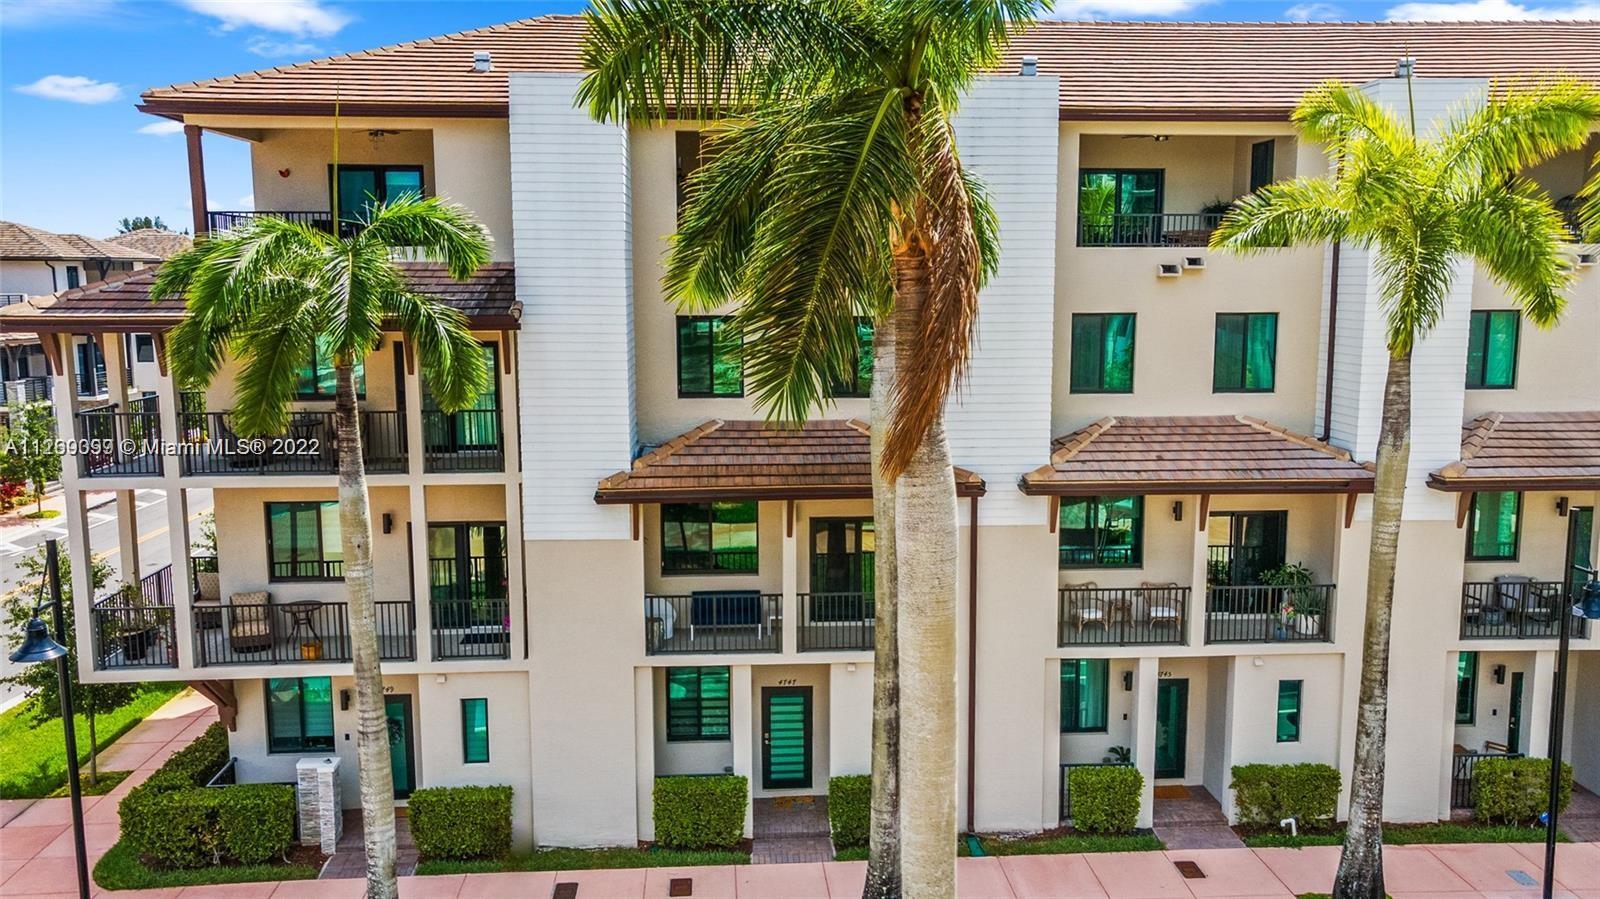 Modern resort style 4 story /townhome in Urbana of Downtown Doral. Close to restaurants and parks. Its like being on vacation. Amenities include a Clubhouse with a fitness center, pool and much more. 3 Bedrooms,  2 full Baths and 2 half baths. Great Investor opportunity.